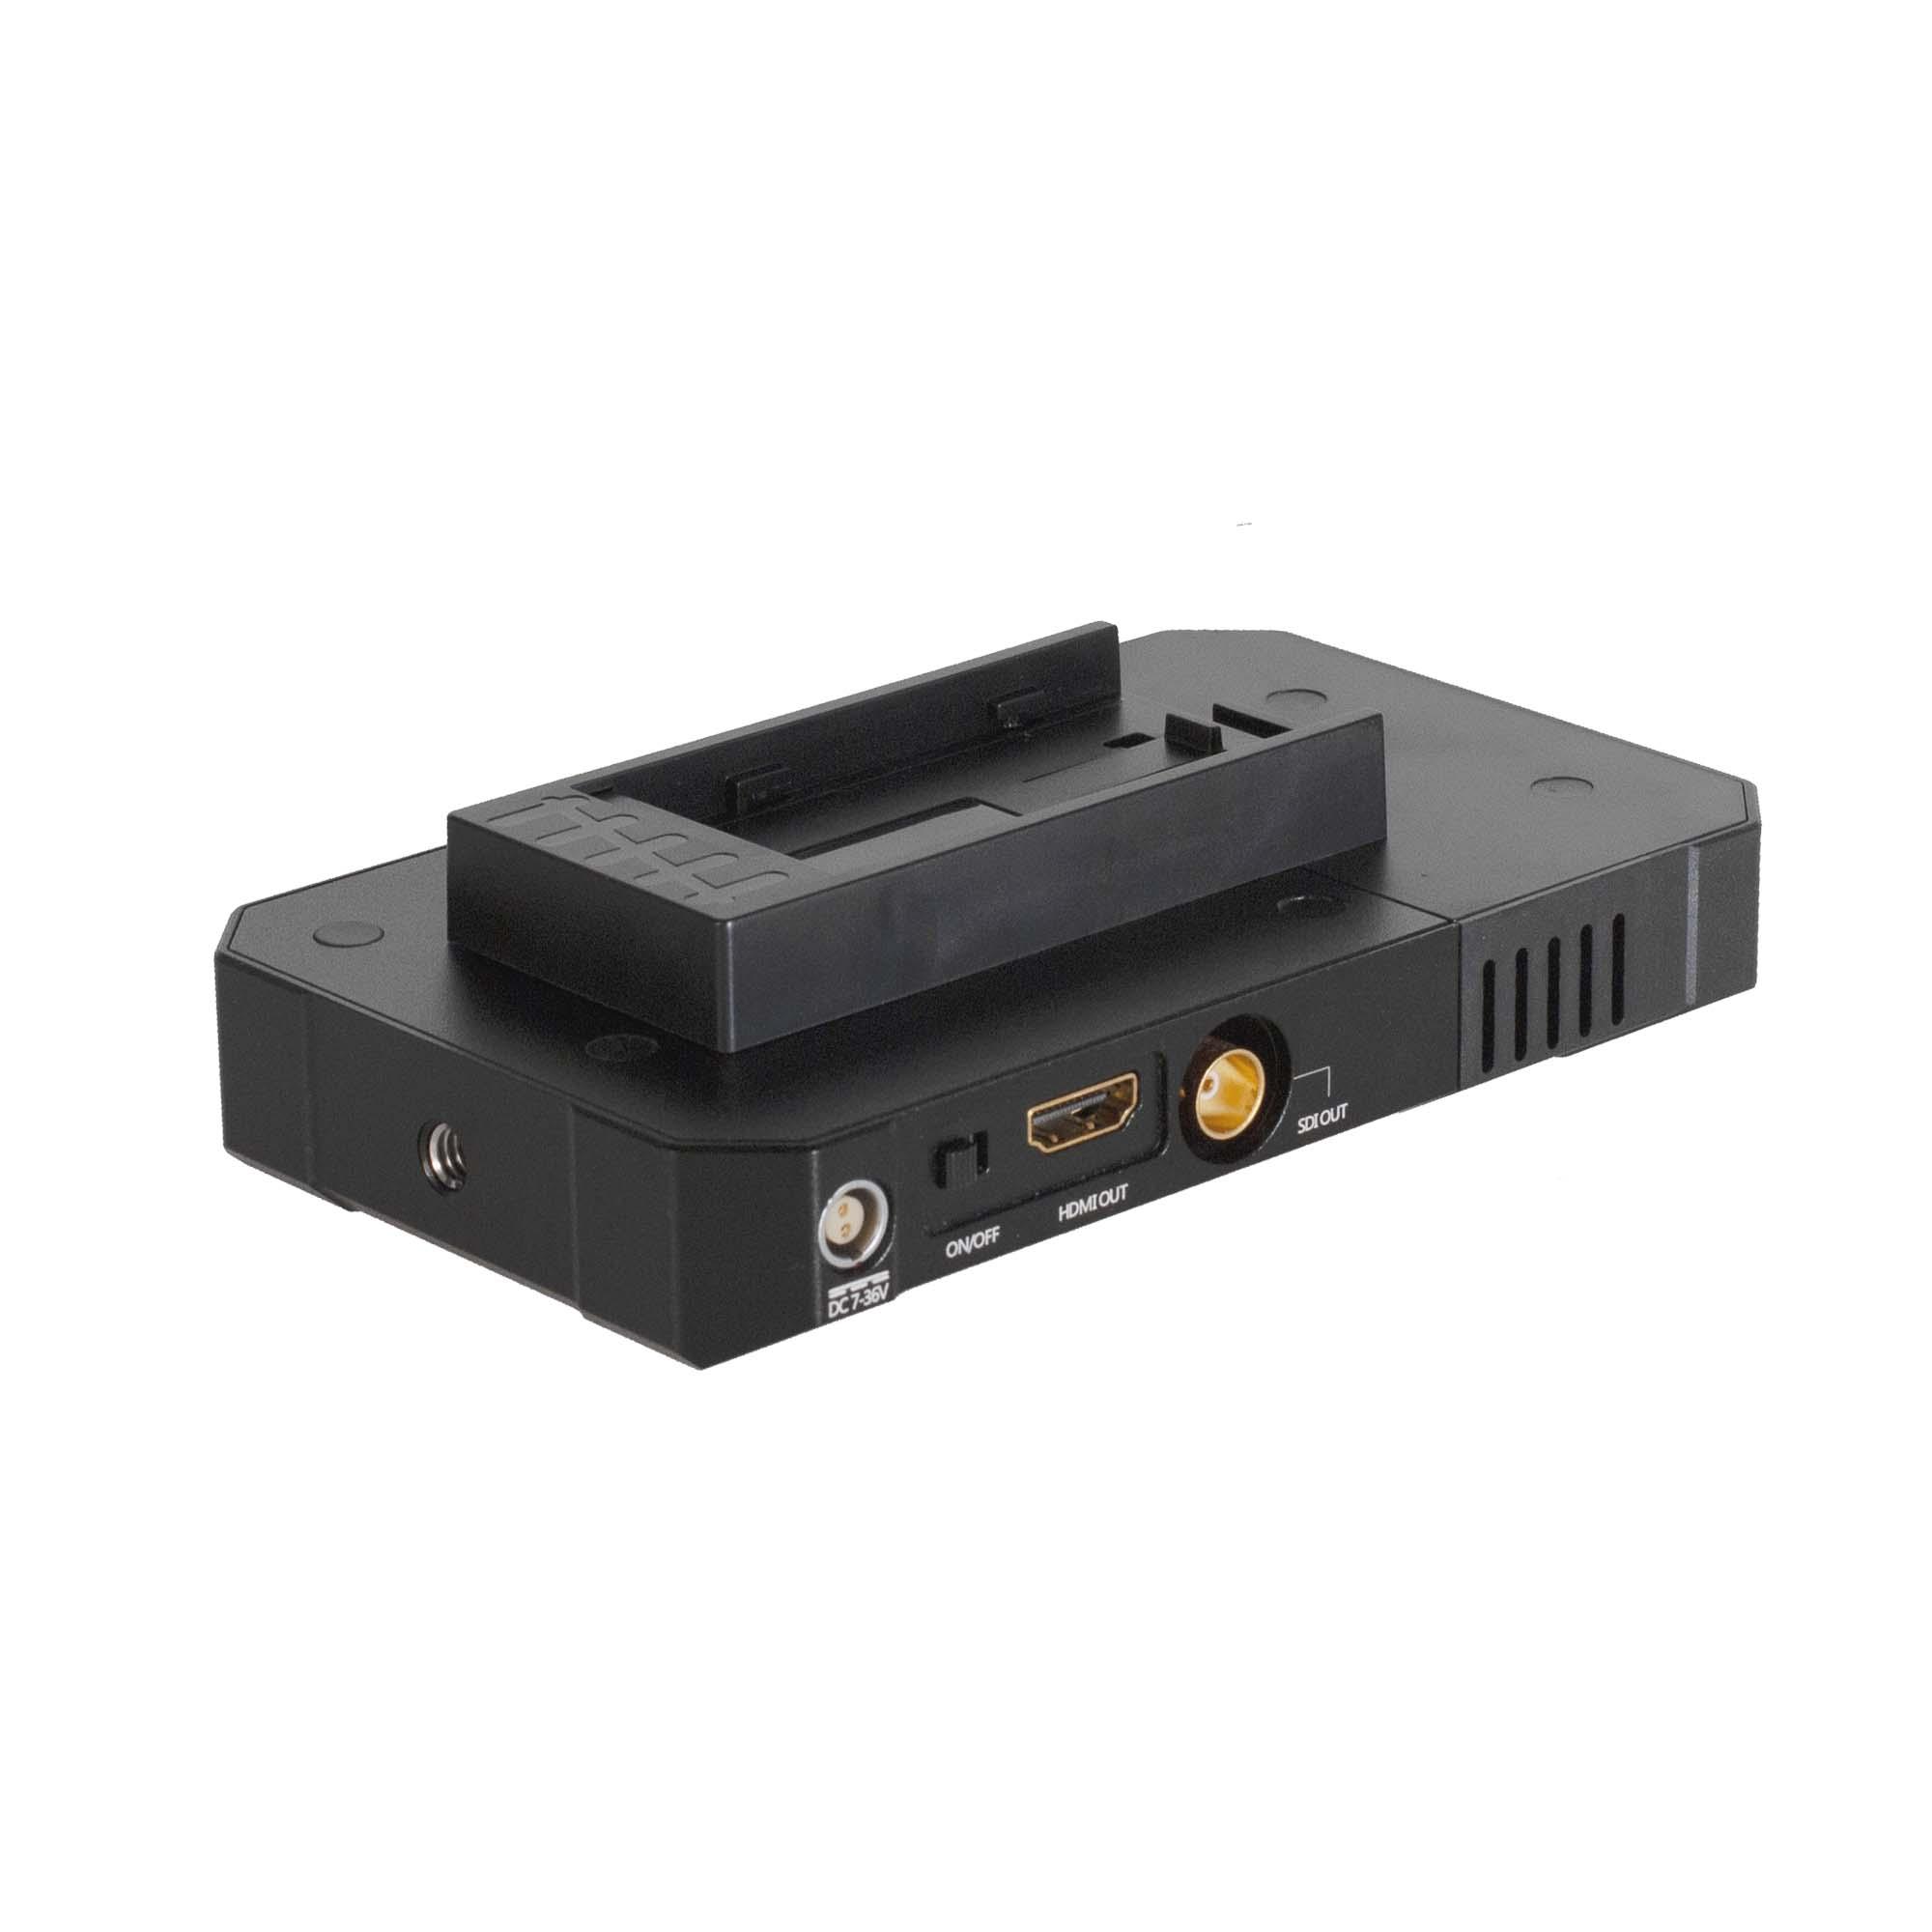 Ghost-Eye 300M Wireless HDMI and SDI Video Receiver